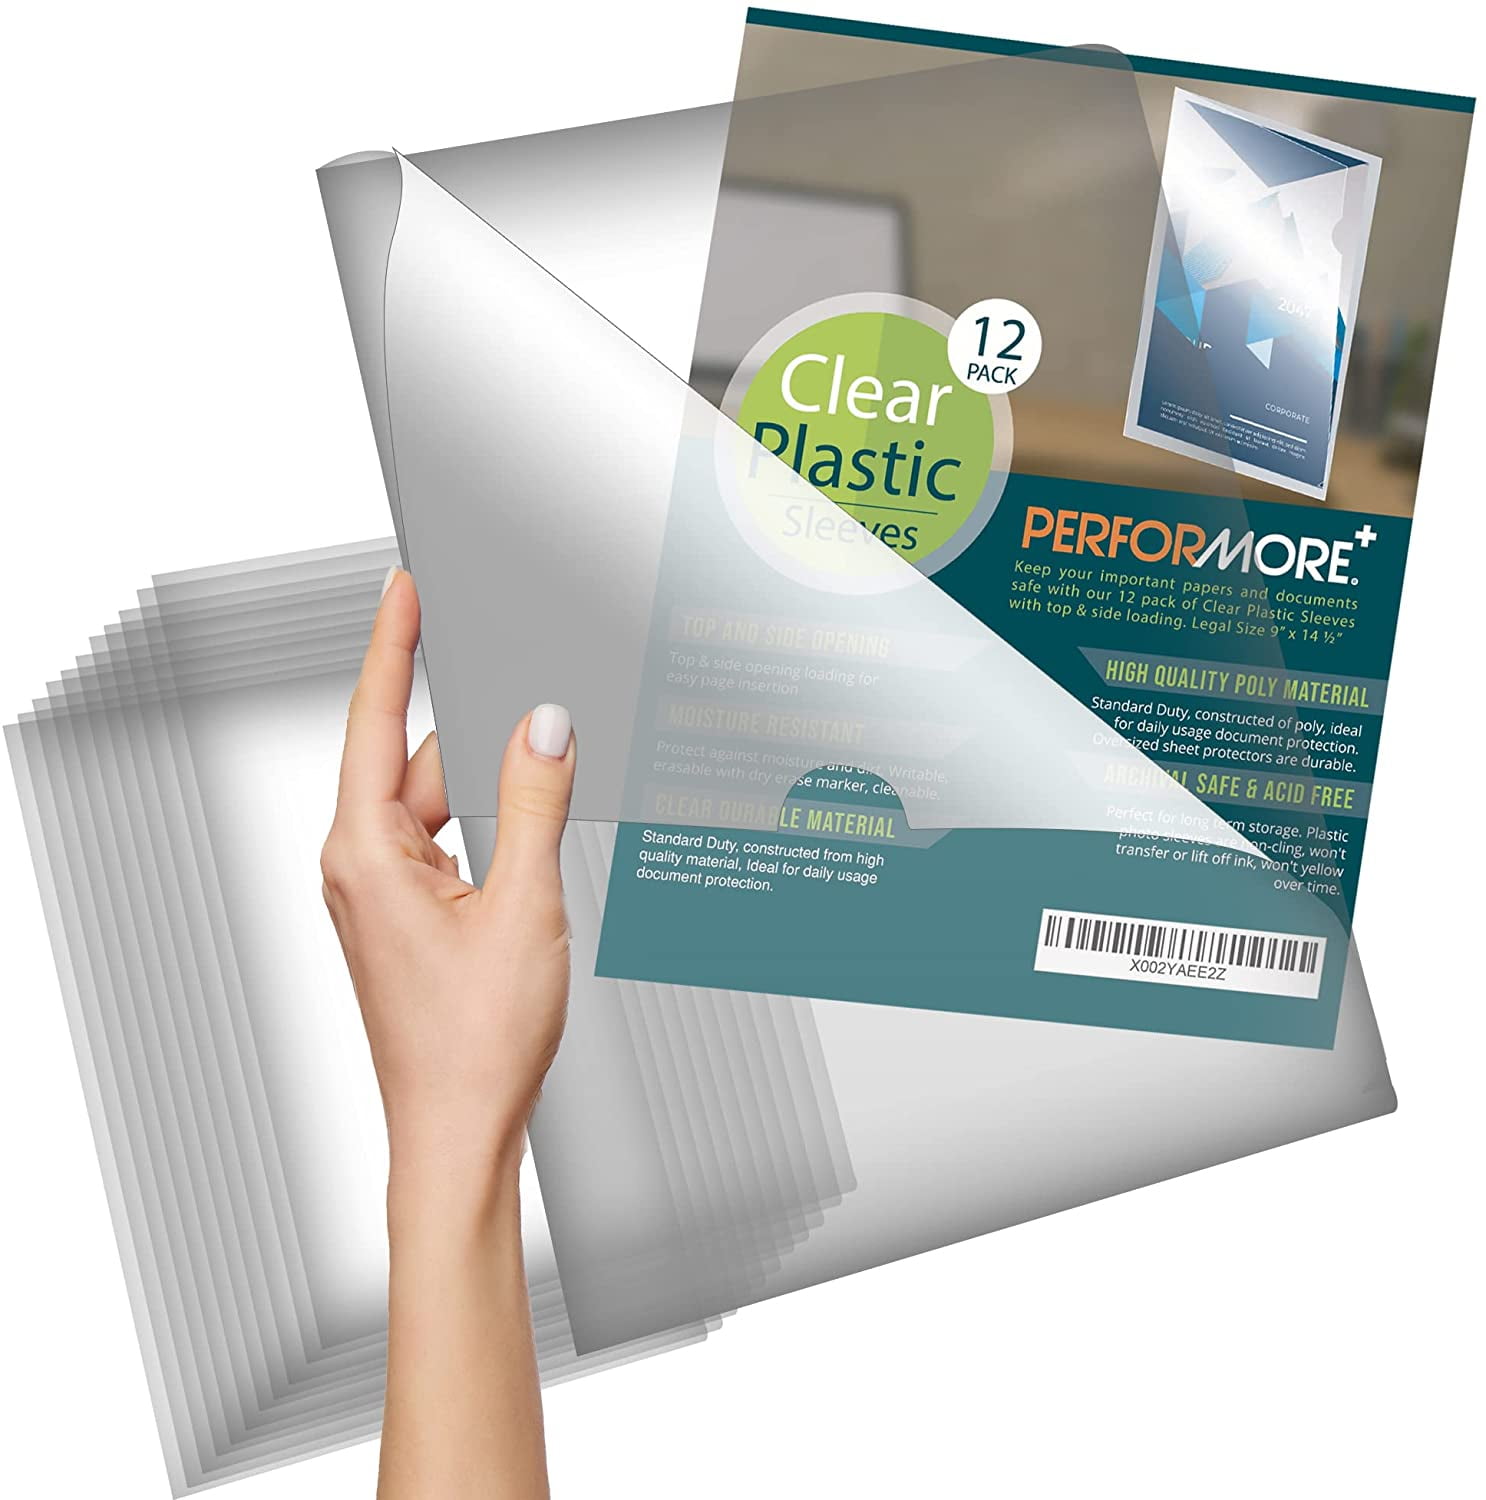 Wholesale a4 plastic sleeves For Holding Diverse File Sizes 